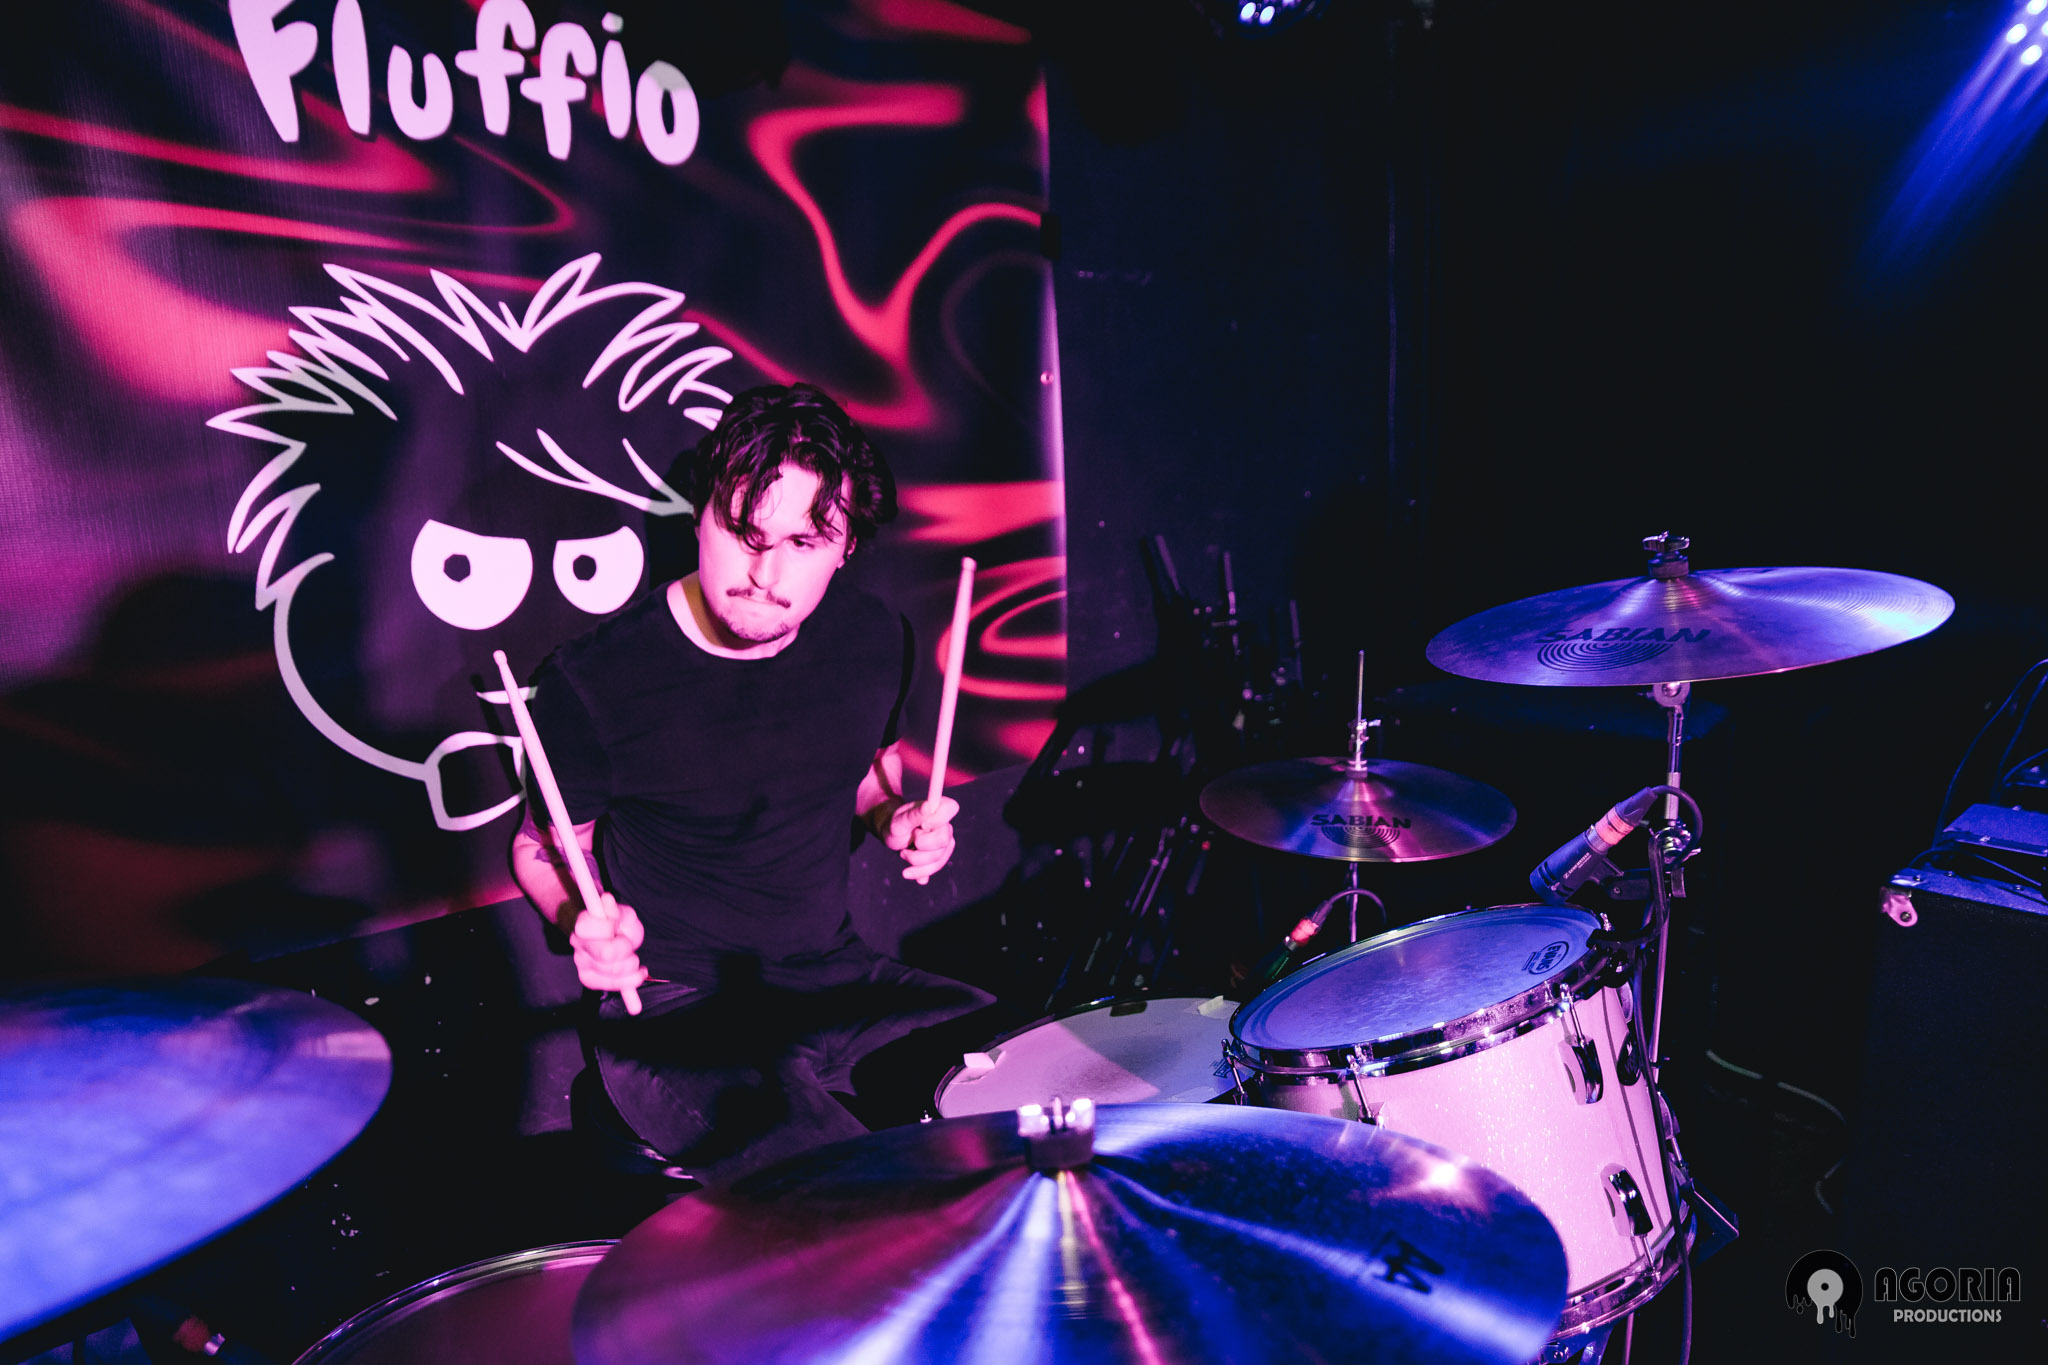 Sean Winick of Fluffio & The RPC drumming live in Toronto at the baby g